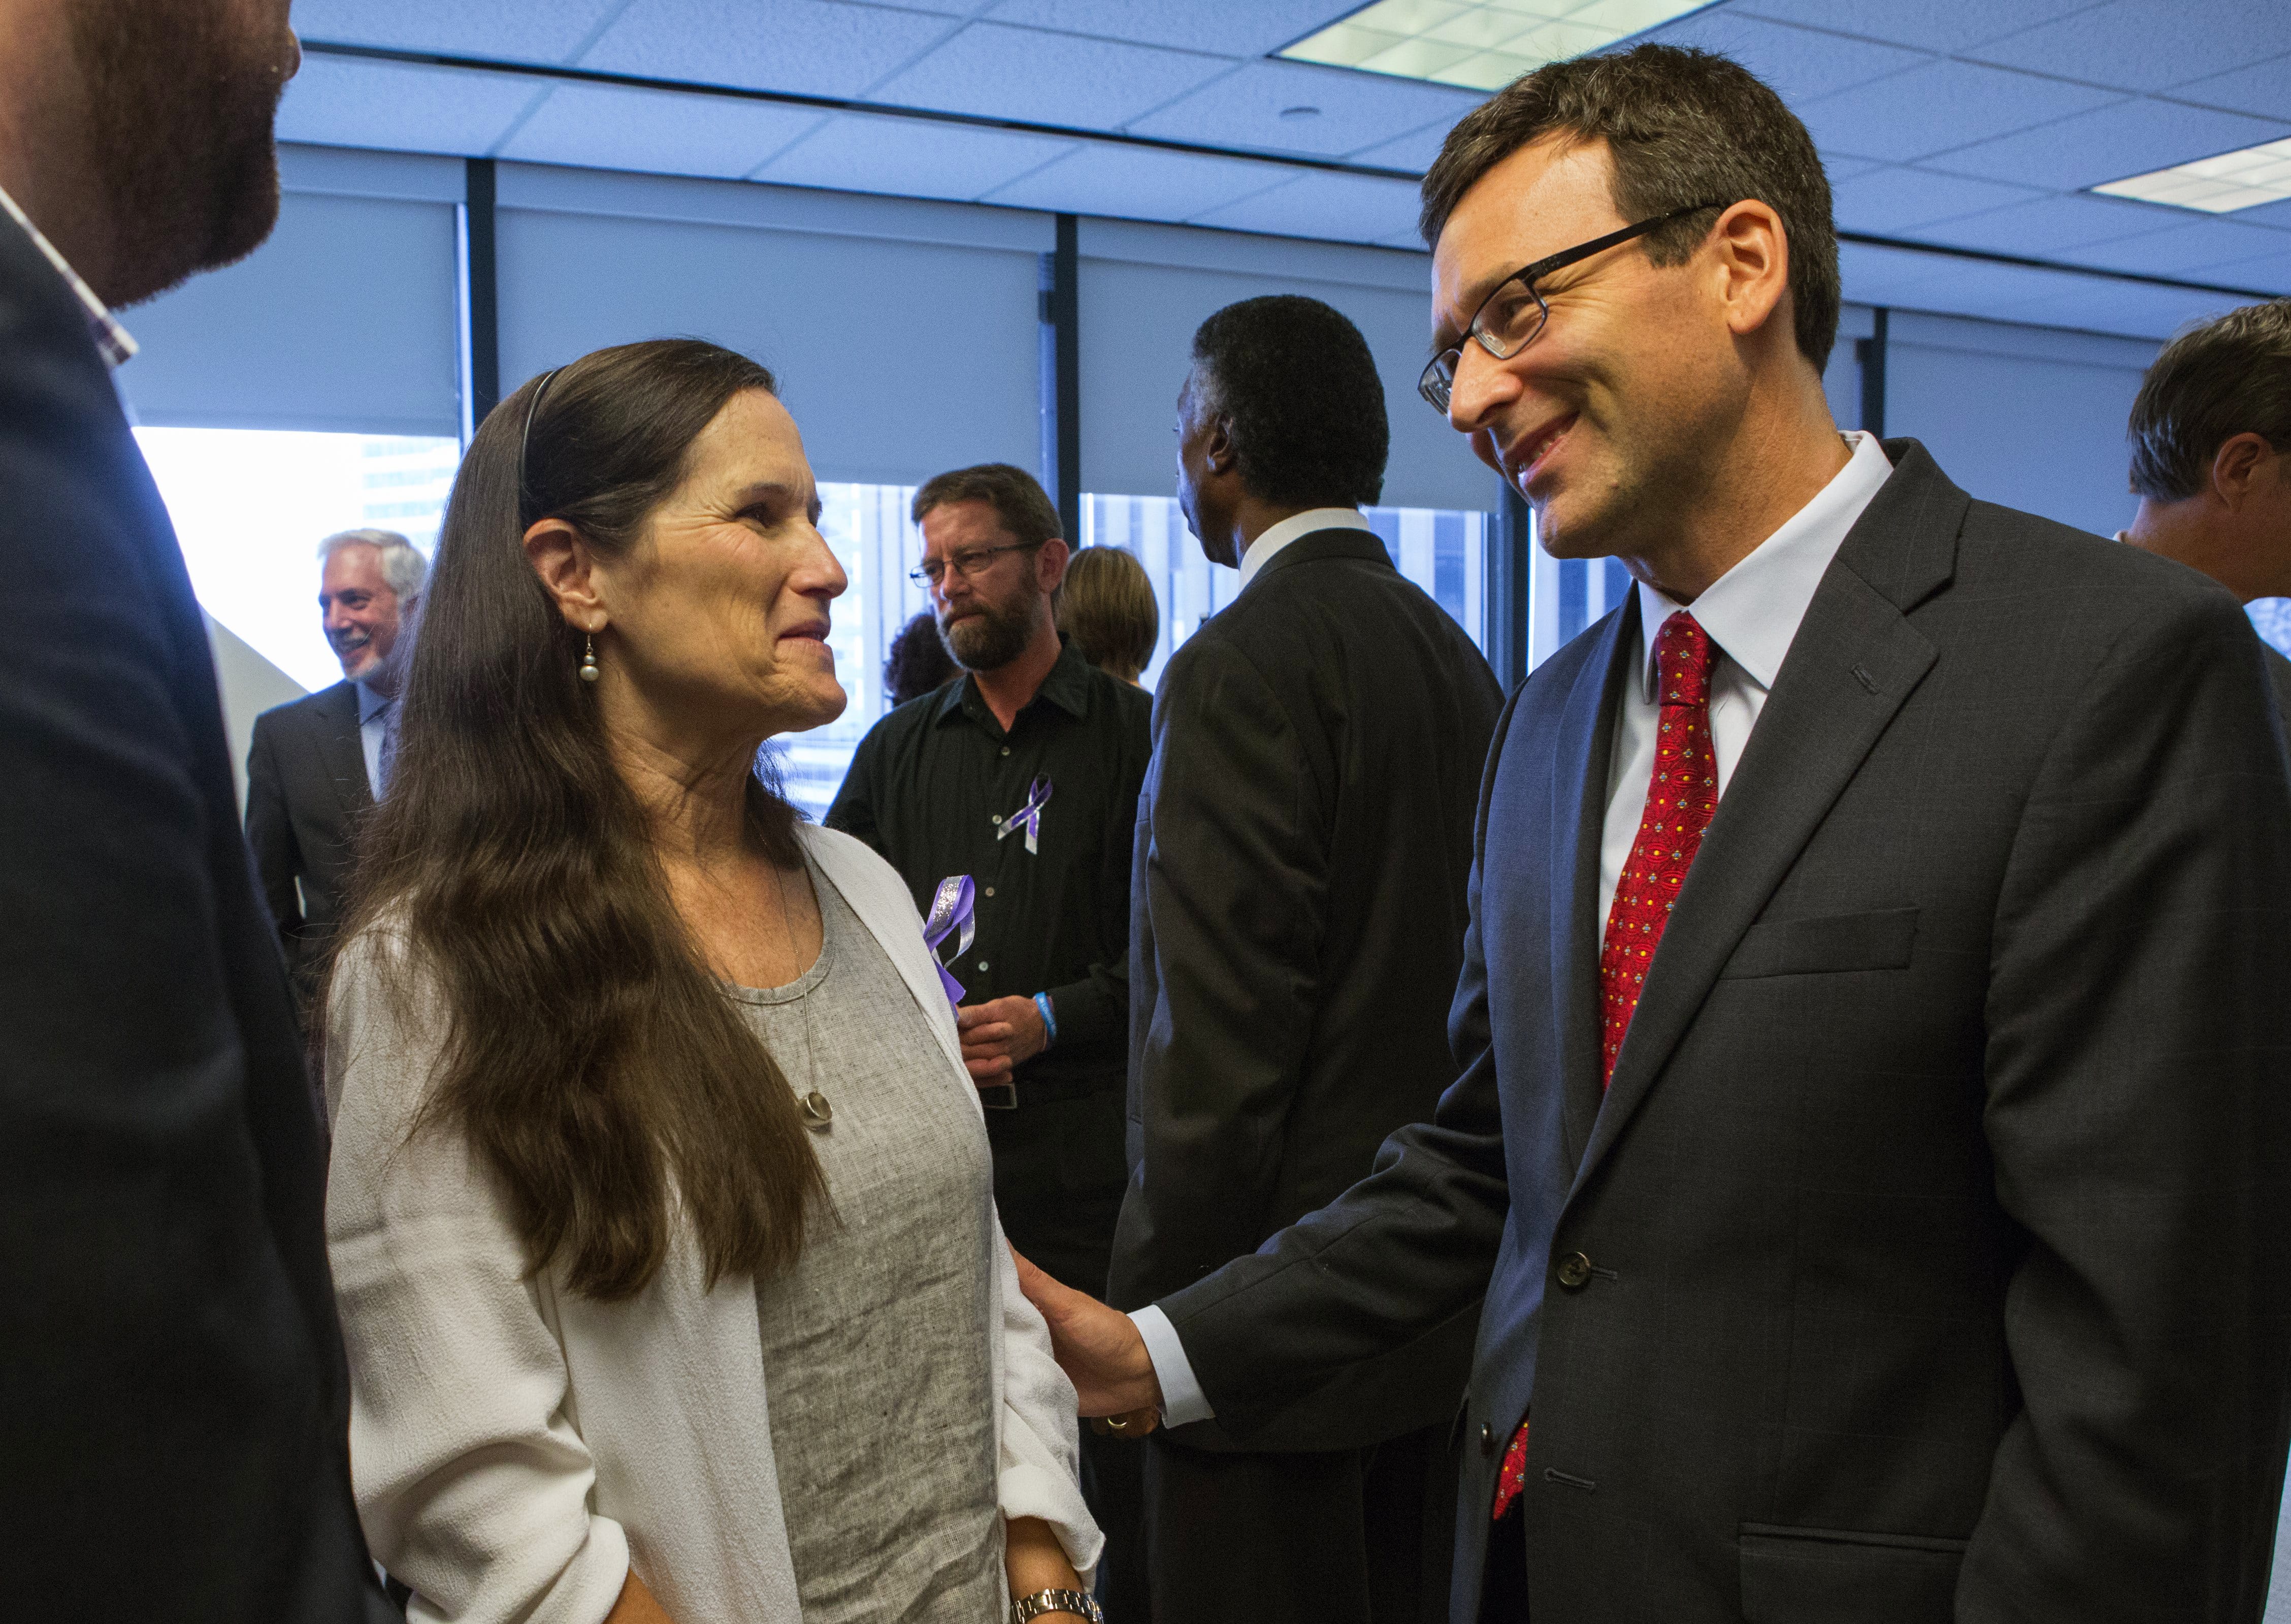 After a press conference in Seattle regarding legislation that would  ban assault weapons in Washington state, Washington State Attorney General Bob Ferguson, right, speaks with Dr. Liz Raemont, mother of Will Kramer who survived a shooting in Mukilteo, Wash., where three young people were killed.  (Ellen M.